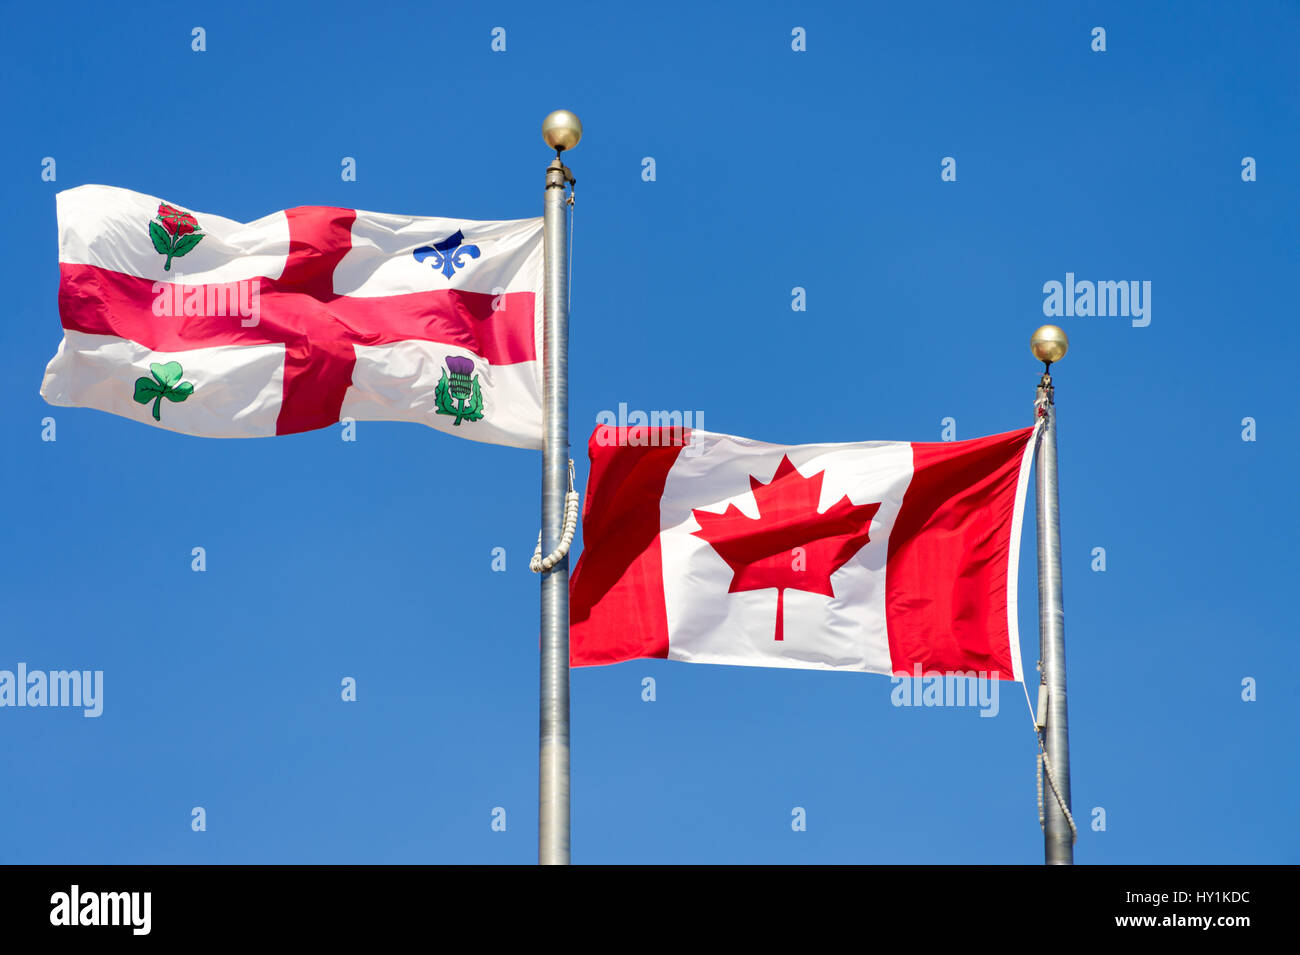 Canadian flag and Montreal city flag waving over blue sky Stock Photo